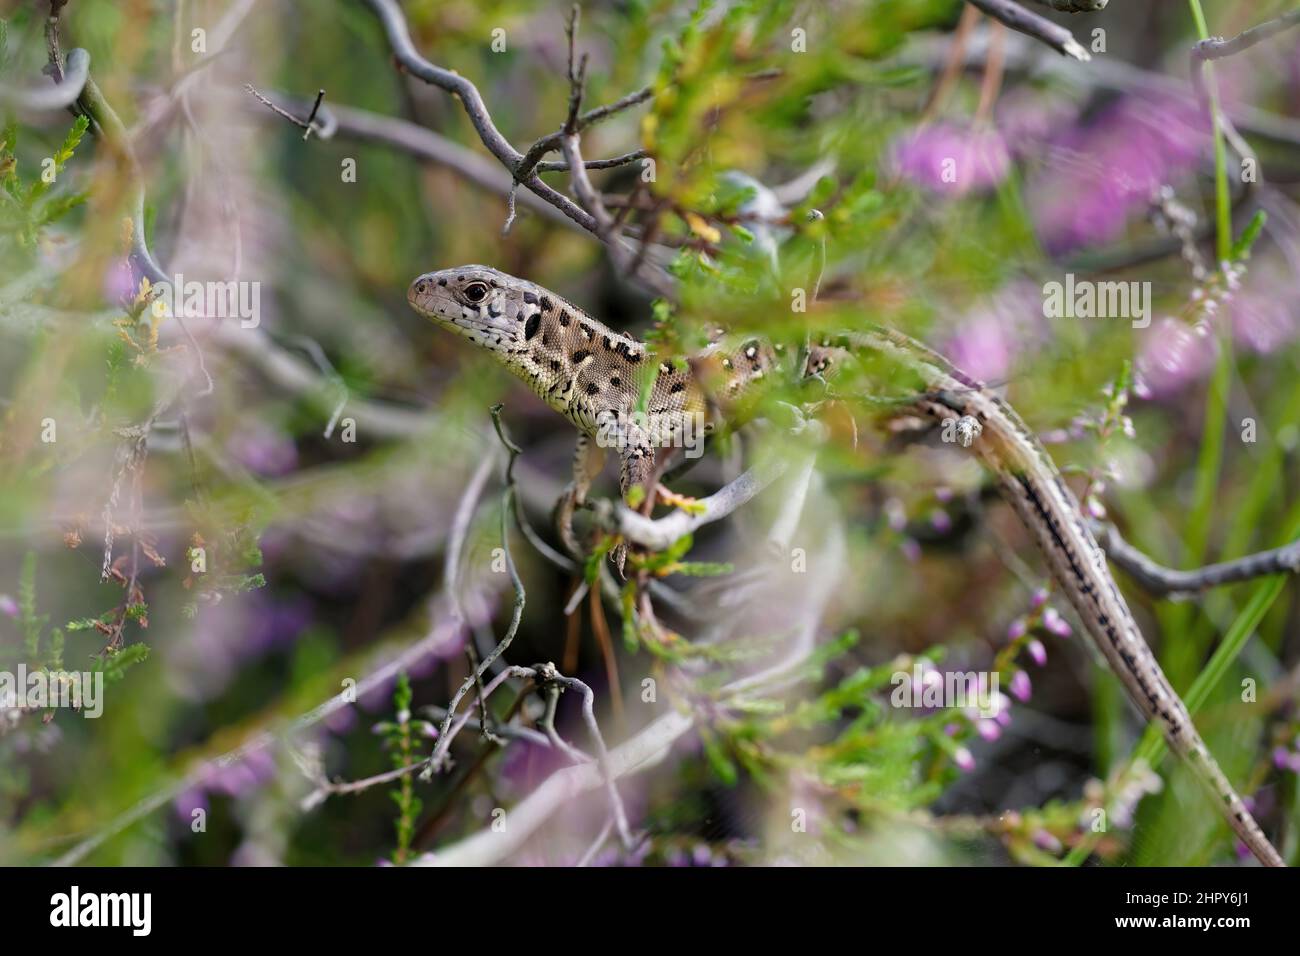 Sand lizard, Lacerta agilis in middle of heather Stock Photo